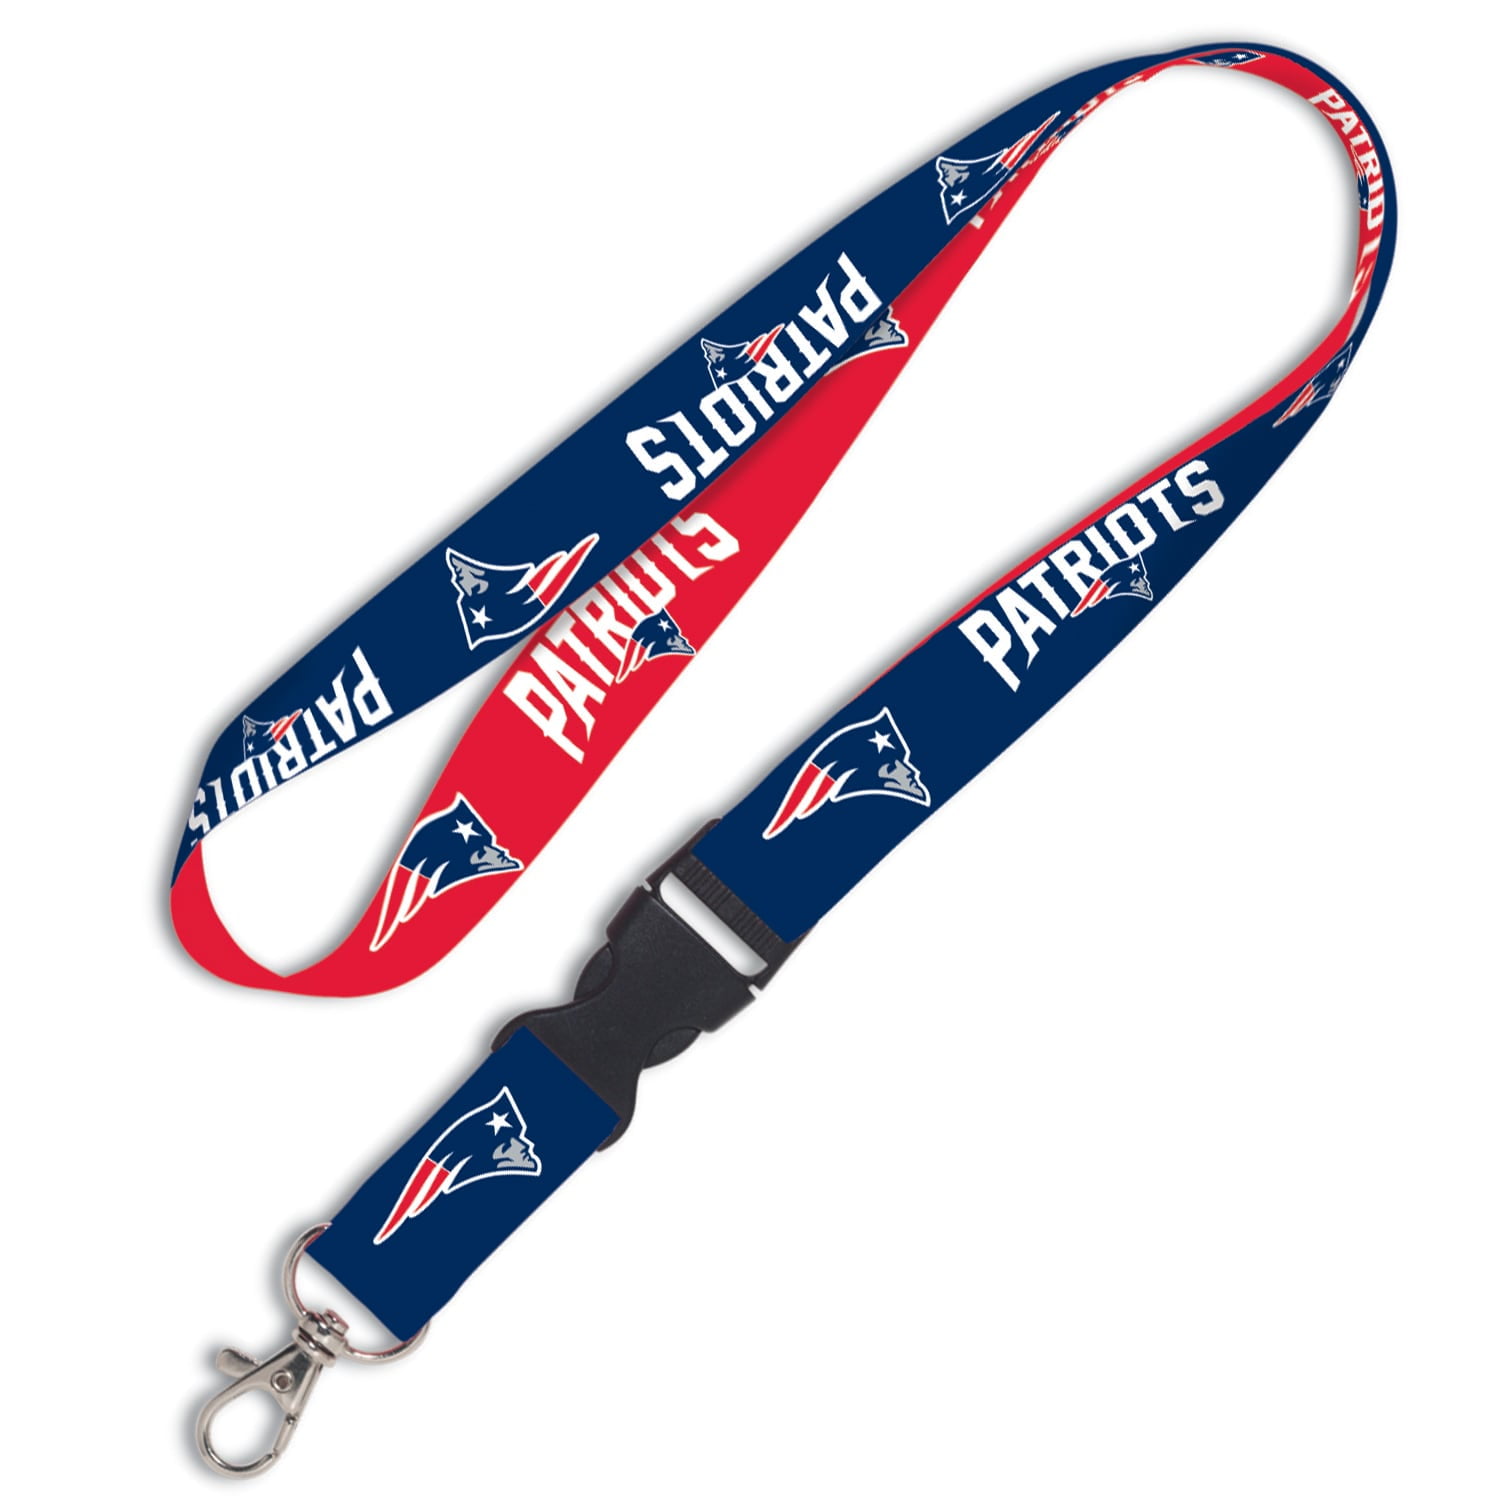 NEW ENGLAND PATRIOTS TWO TONE BLUE & GREY LANYARD WITH TICKET HOLDER AND COLLECTIBLE PLAYER CARD 